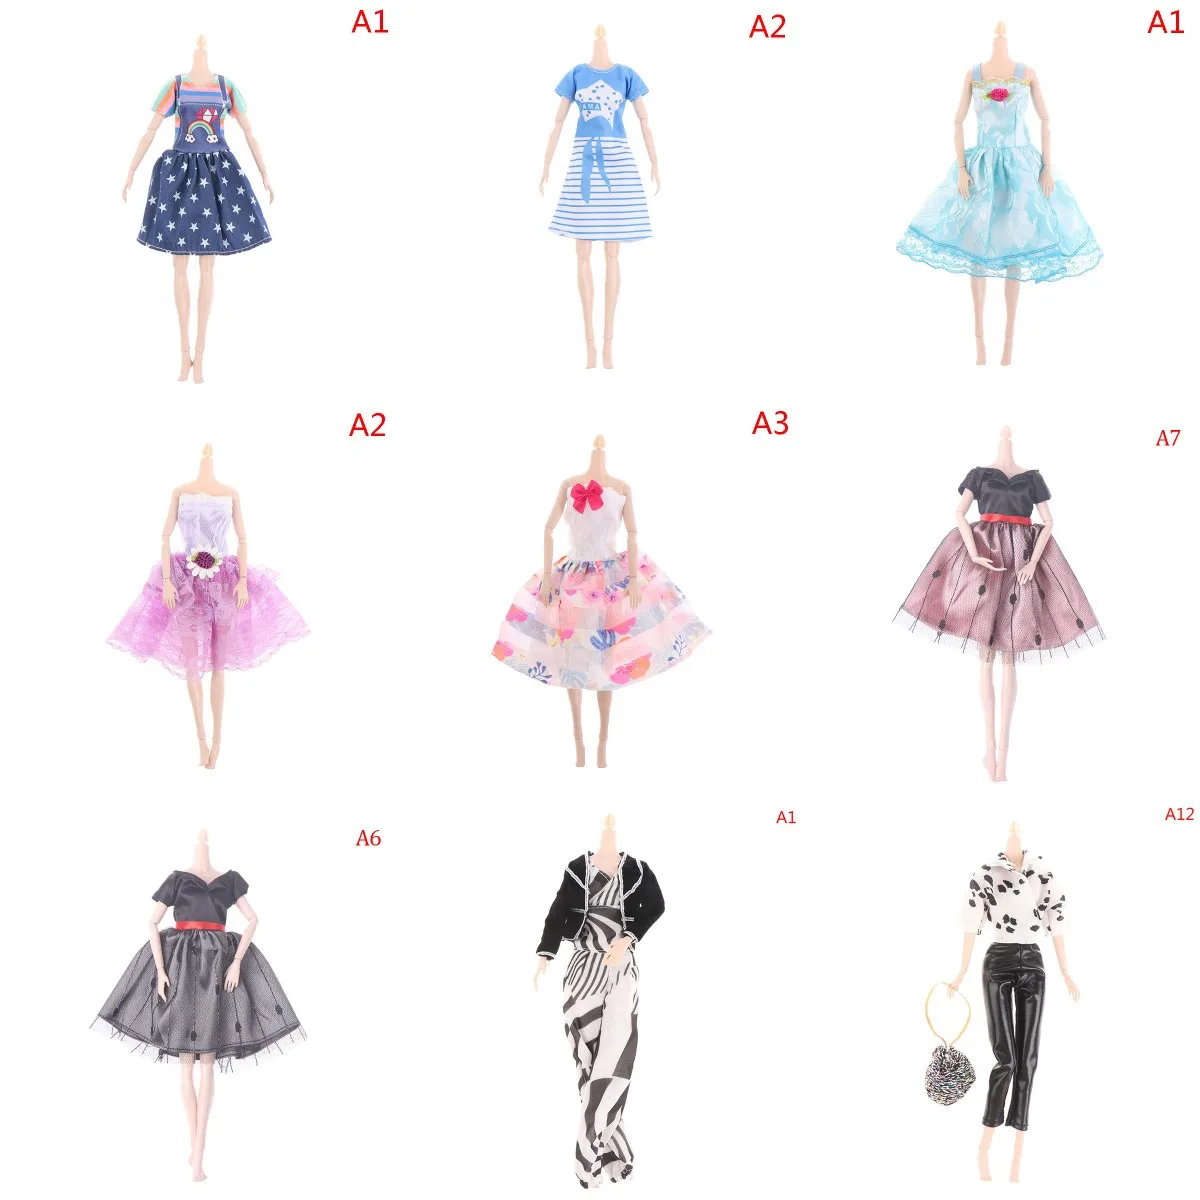 

1pc Free Shipping Doll Clothes Fashion Suit Dress For Born Baby Clothes Items Our Generation,Toys For Girls Miniature Accessorie